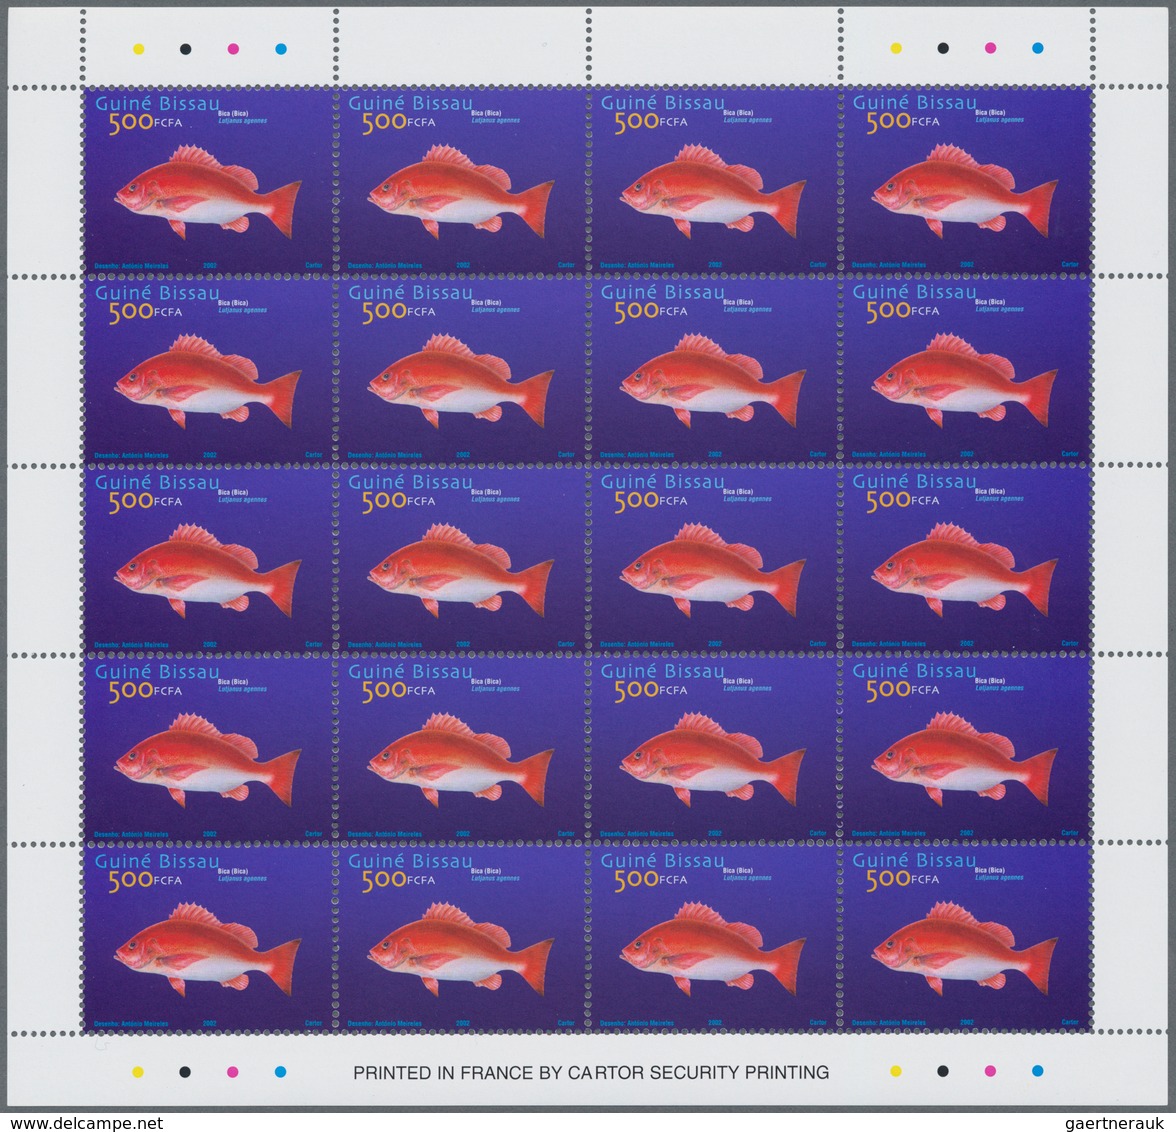 Guinea-Bissau: 2002, FISHES, Souvenir Sheet, Investment Lot Of 500 Copies Mint Never Hinged (Mi.no. - Guinea-Bissau